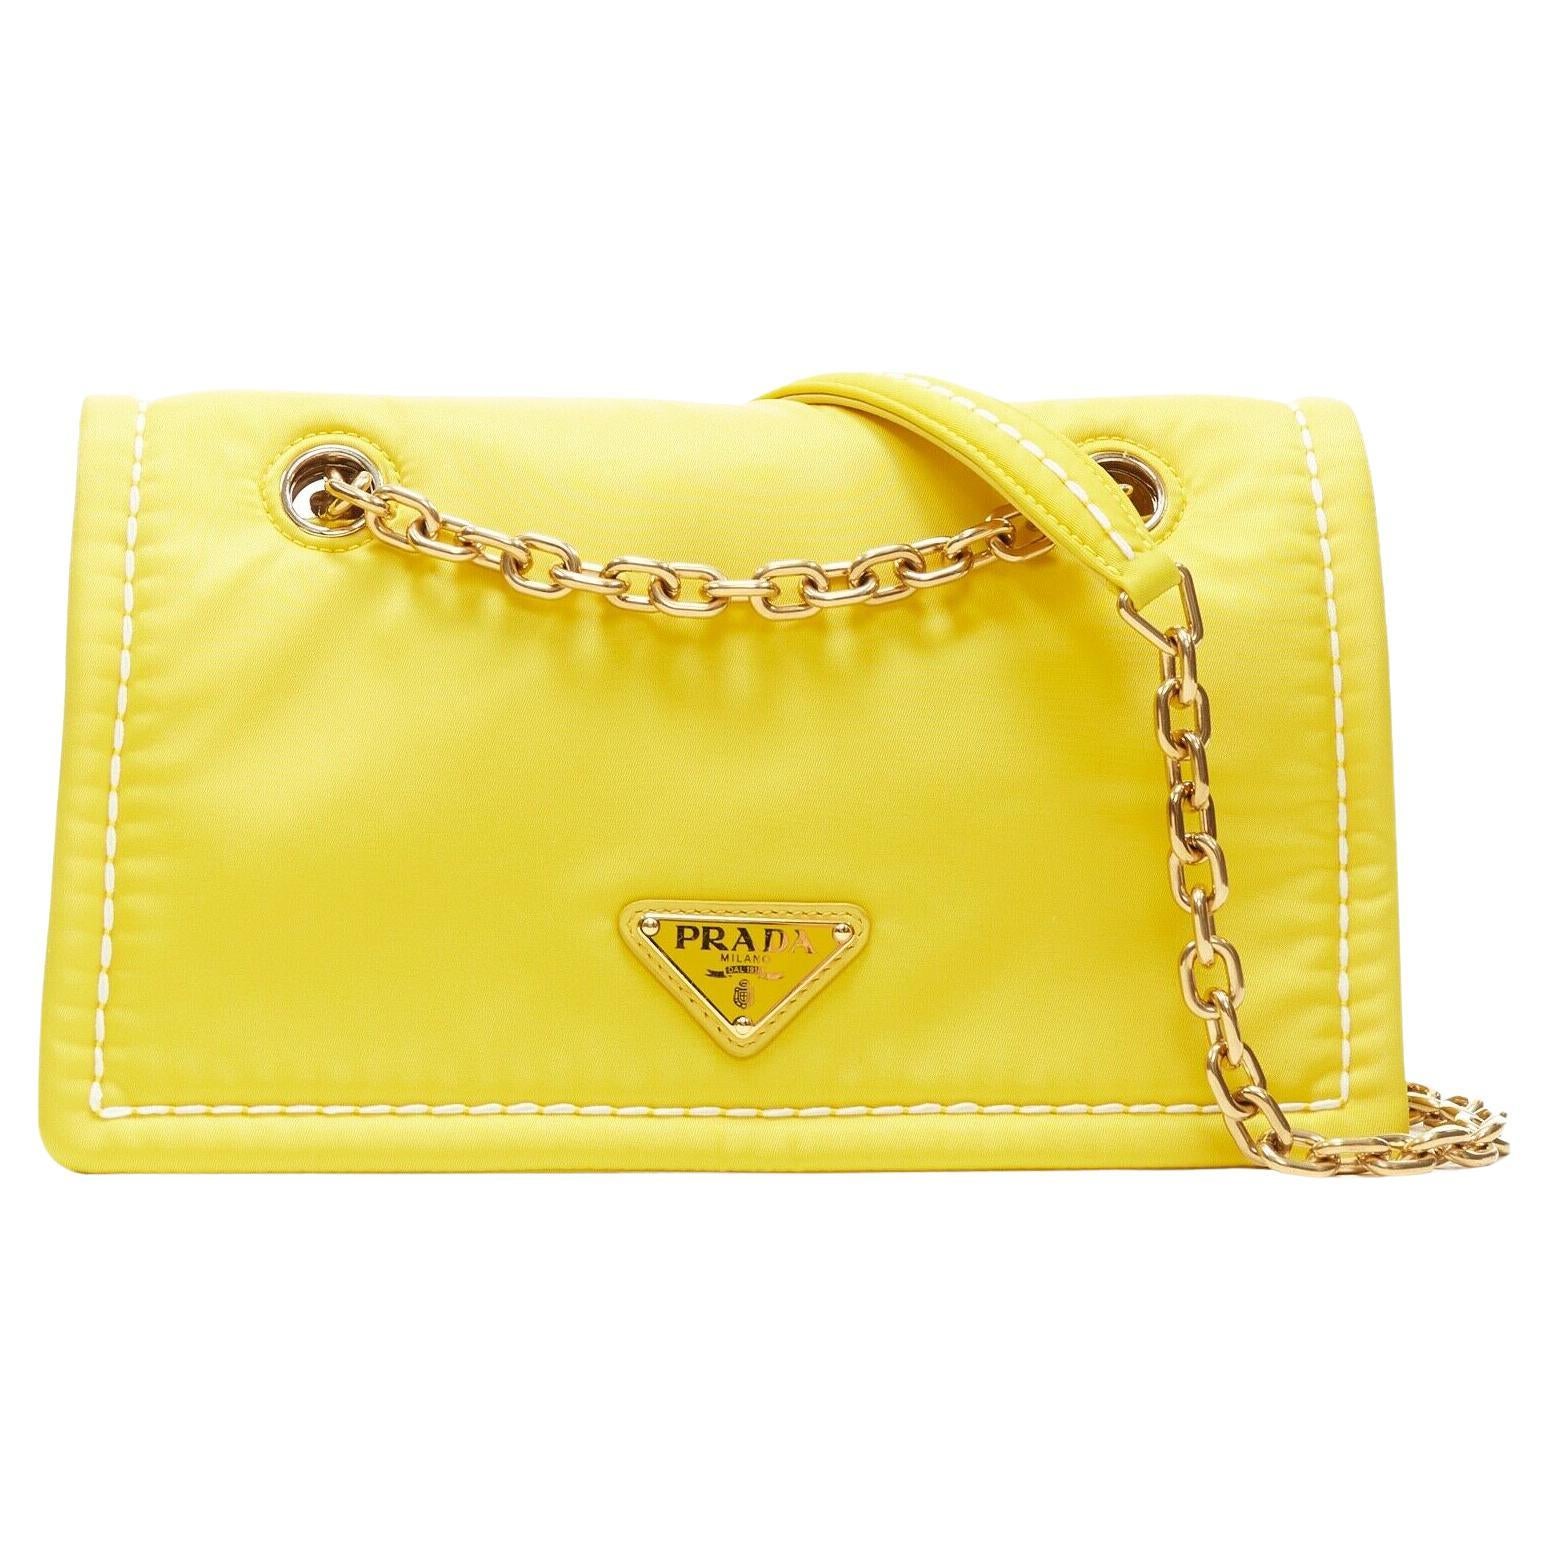 Authentic PRADA Nylon and Leather Crossbody Shoulder Bag yellow From Japan